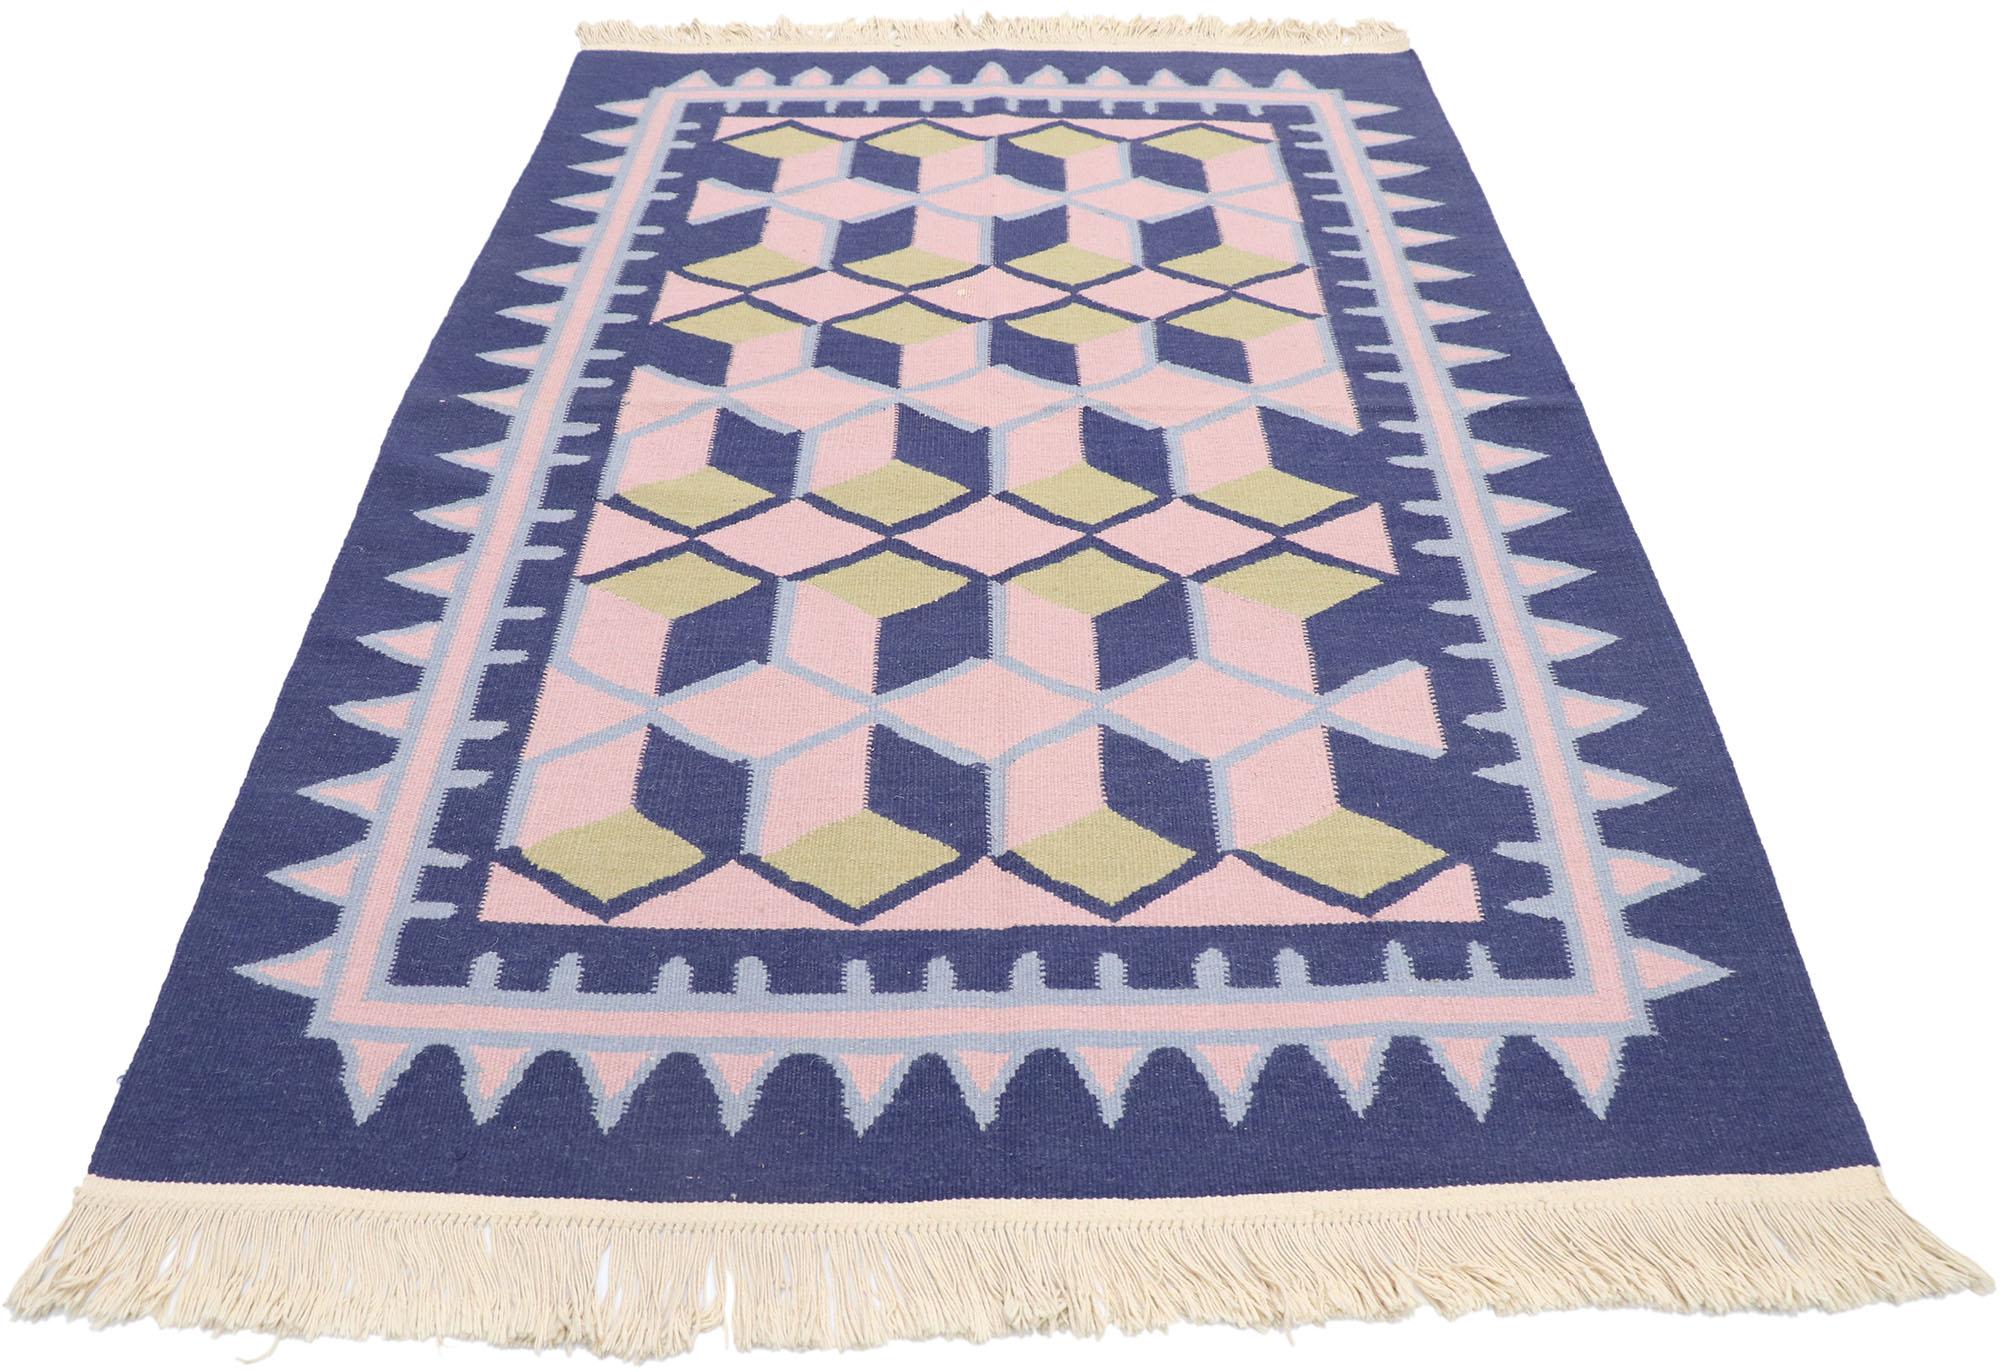 Chinese Export Vintage Chinese Geometric Kilim Rug with Post-Modern Cubist Style